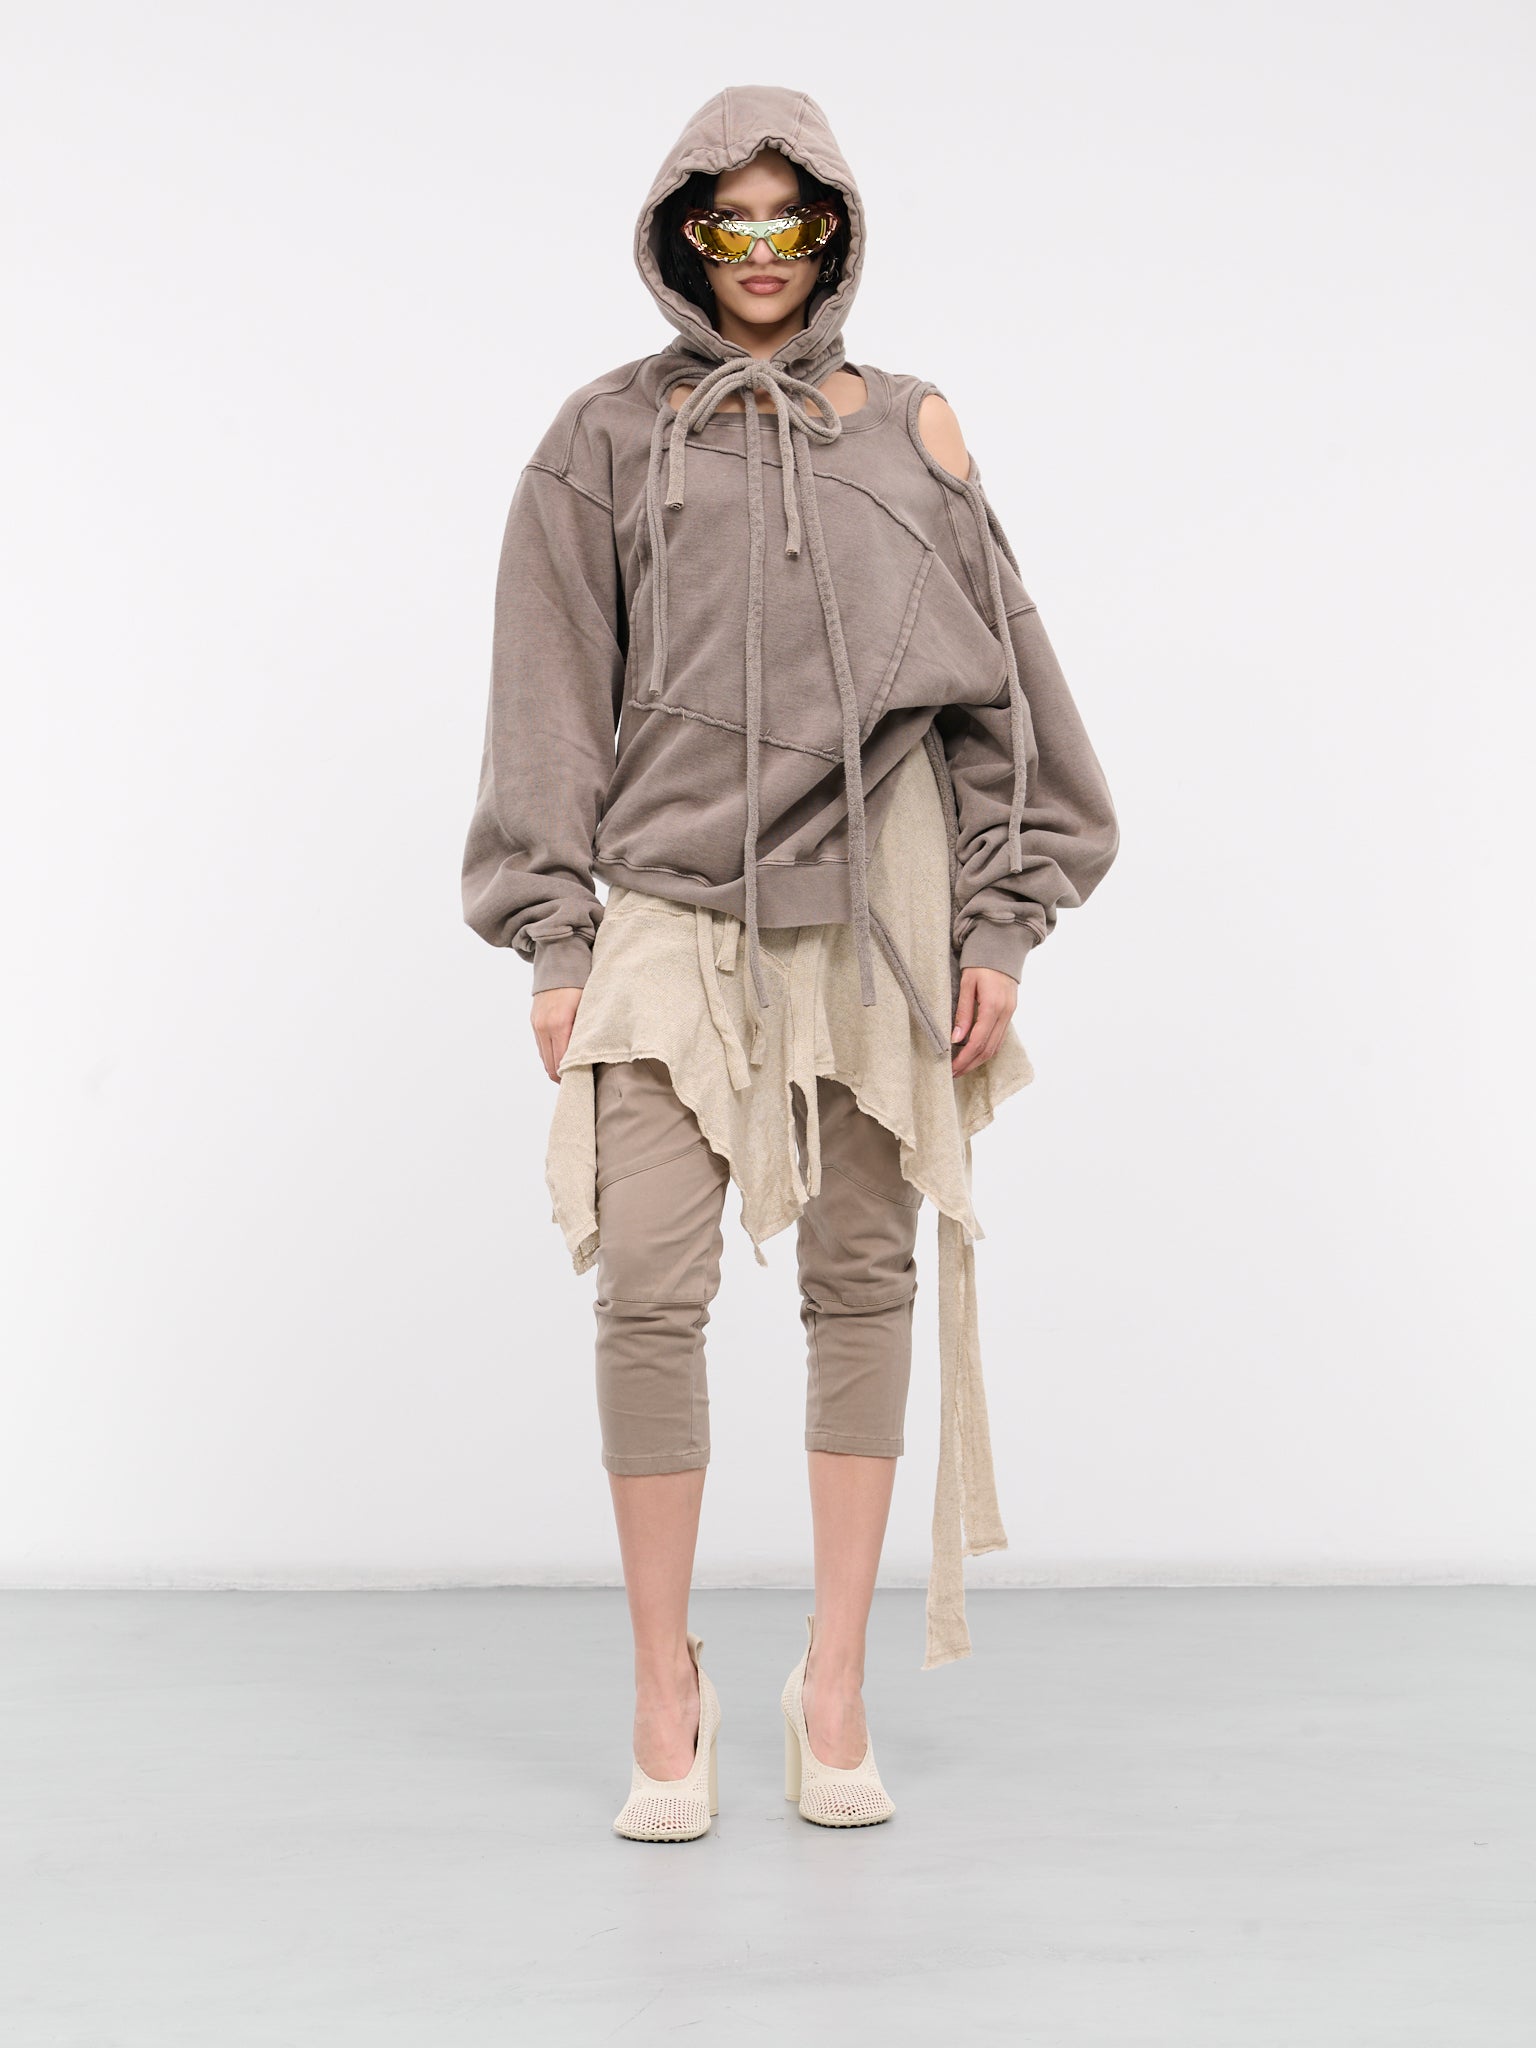 Deconstructed Cut-Out Hoodie (1503904-LIGHT-BROWN)